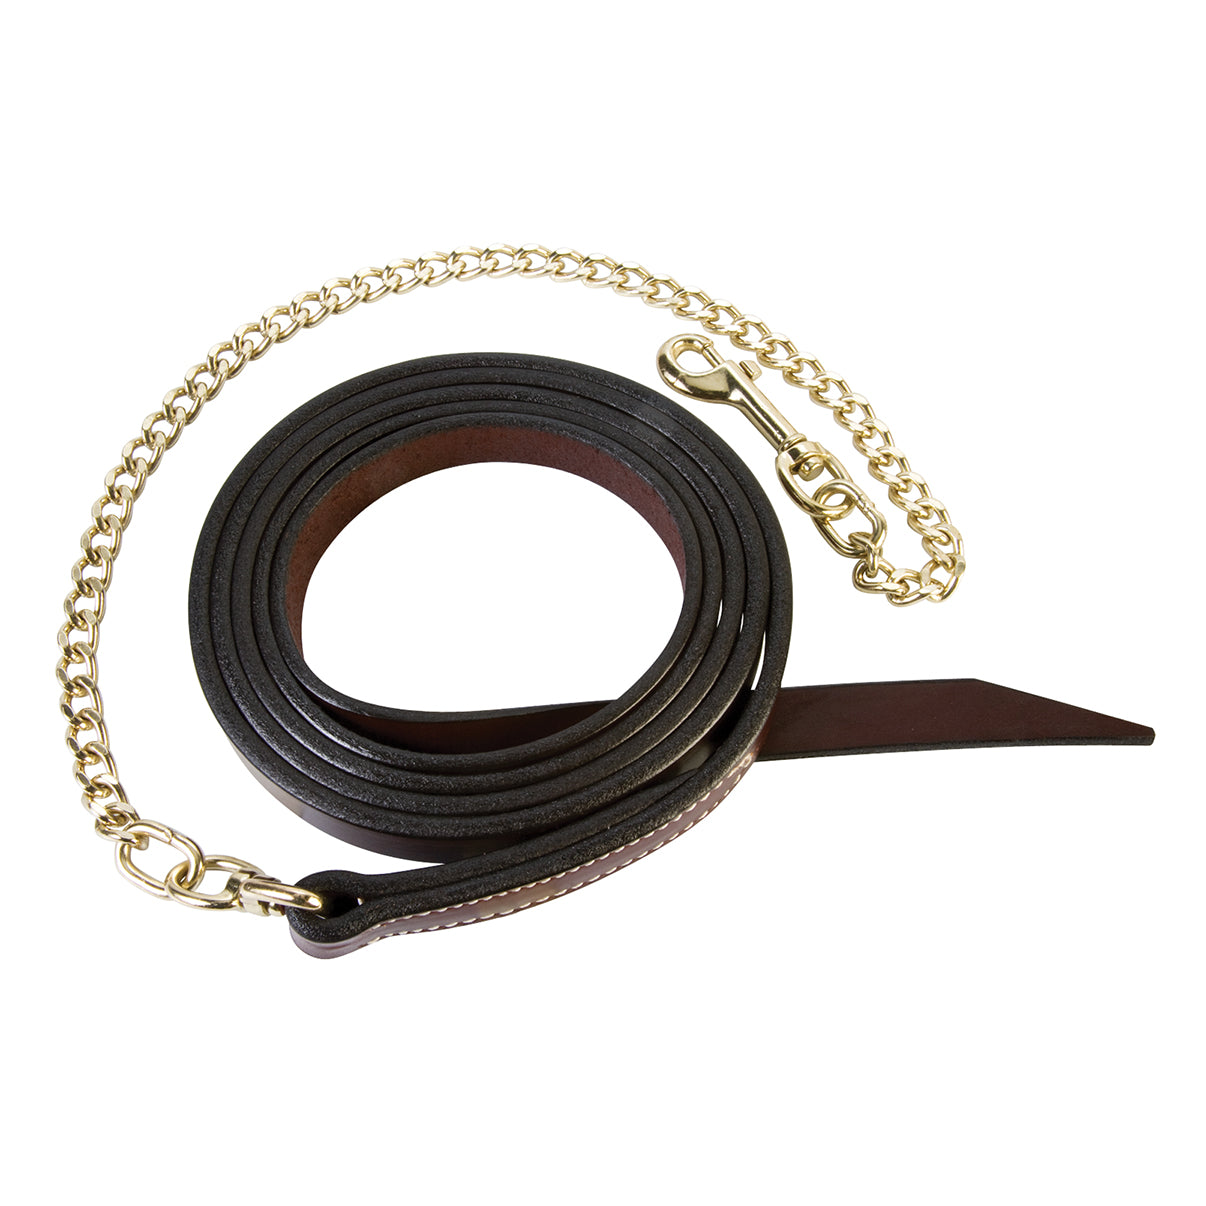 1" Single-Ply Horse Lead, with 24" Brass Plated Chain